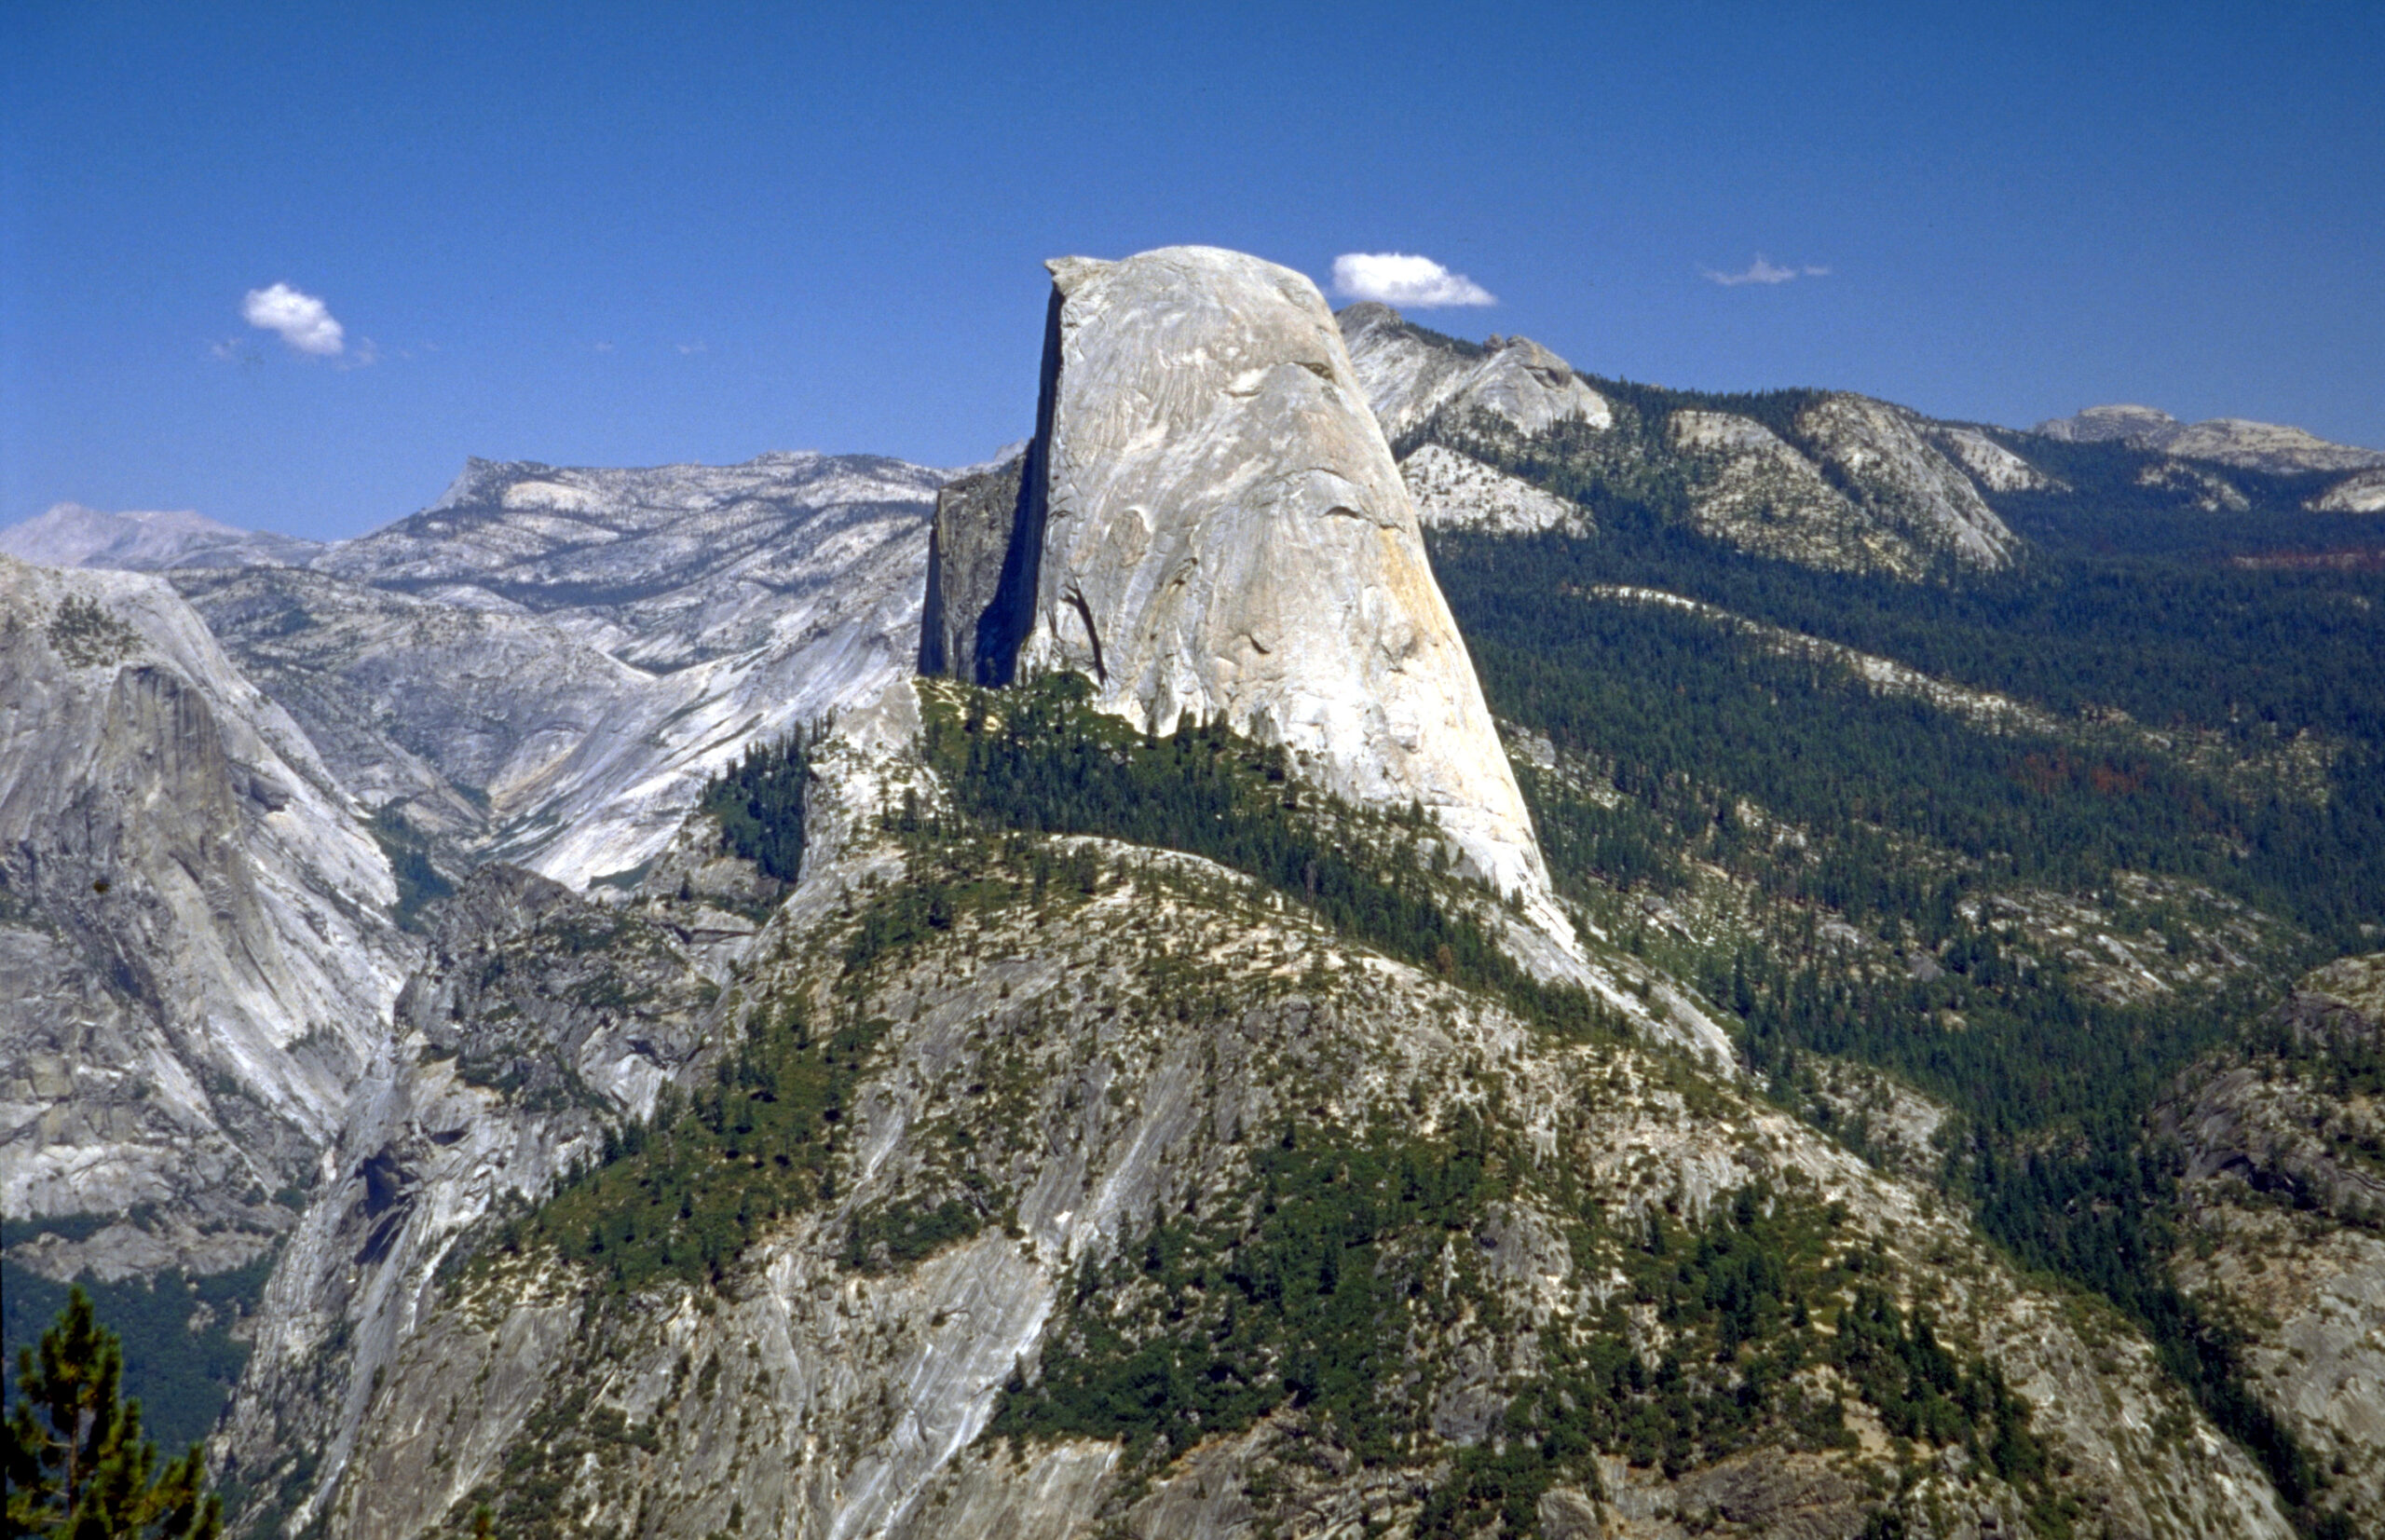 View of Half Dome from Washburn Peak